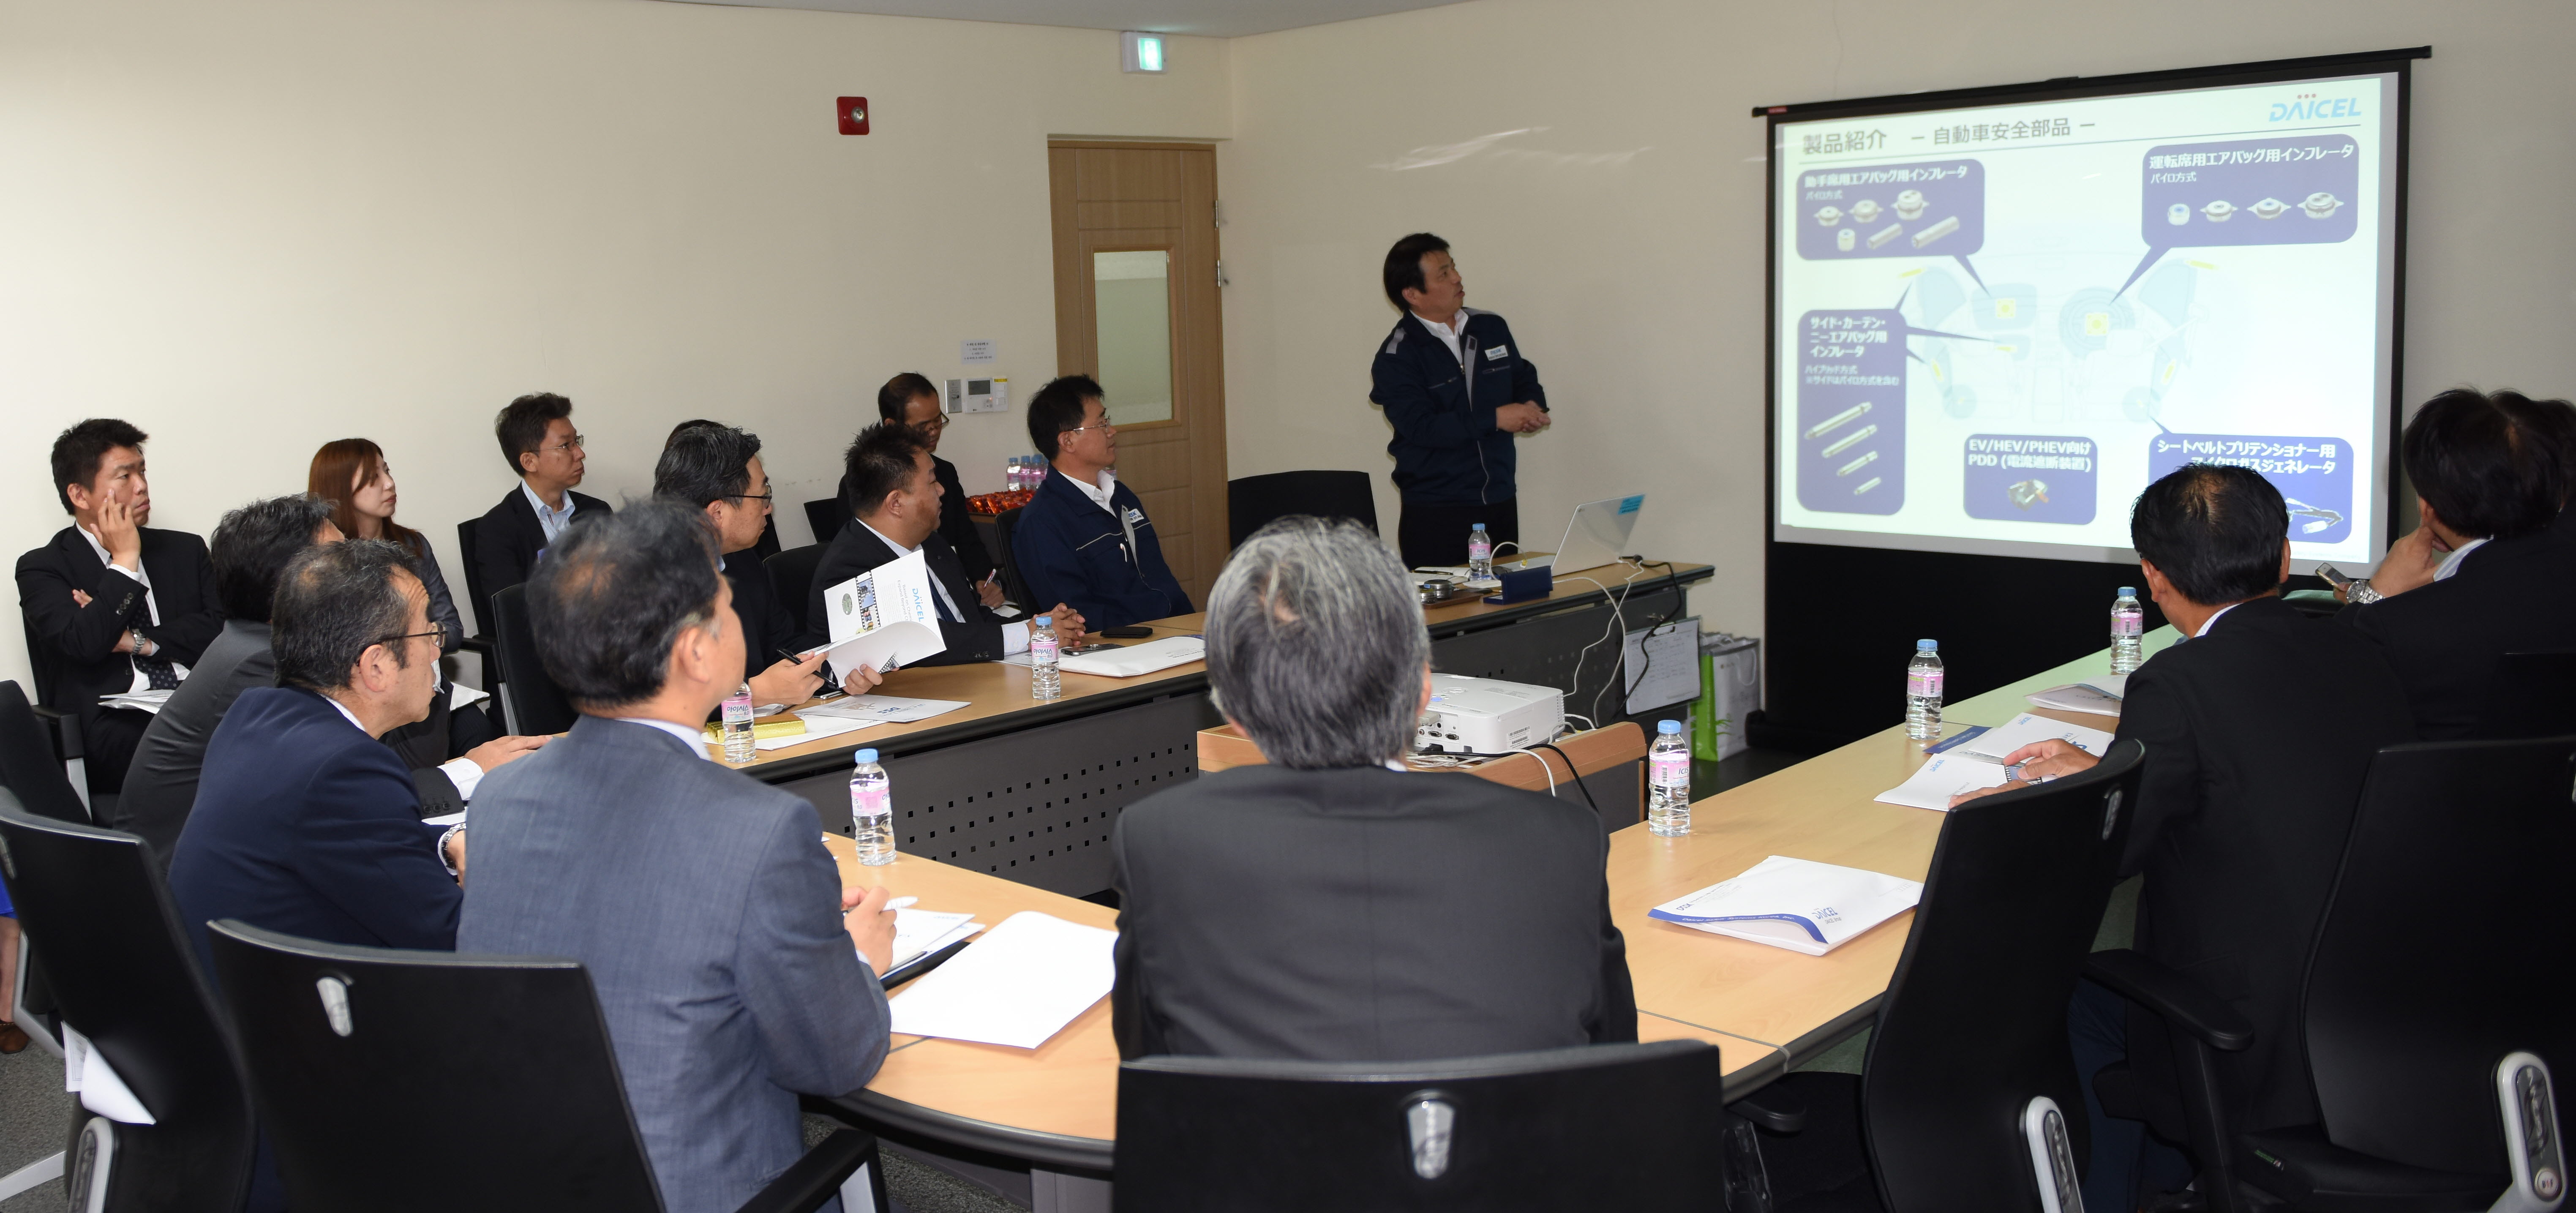 A Presentation Meeting on the Investment Environment for Jap...